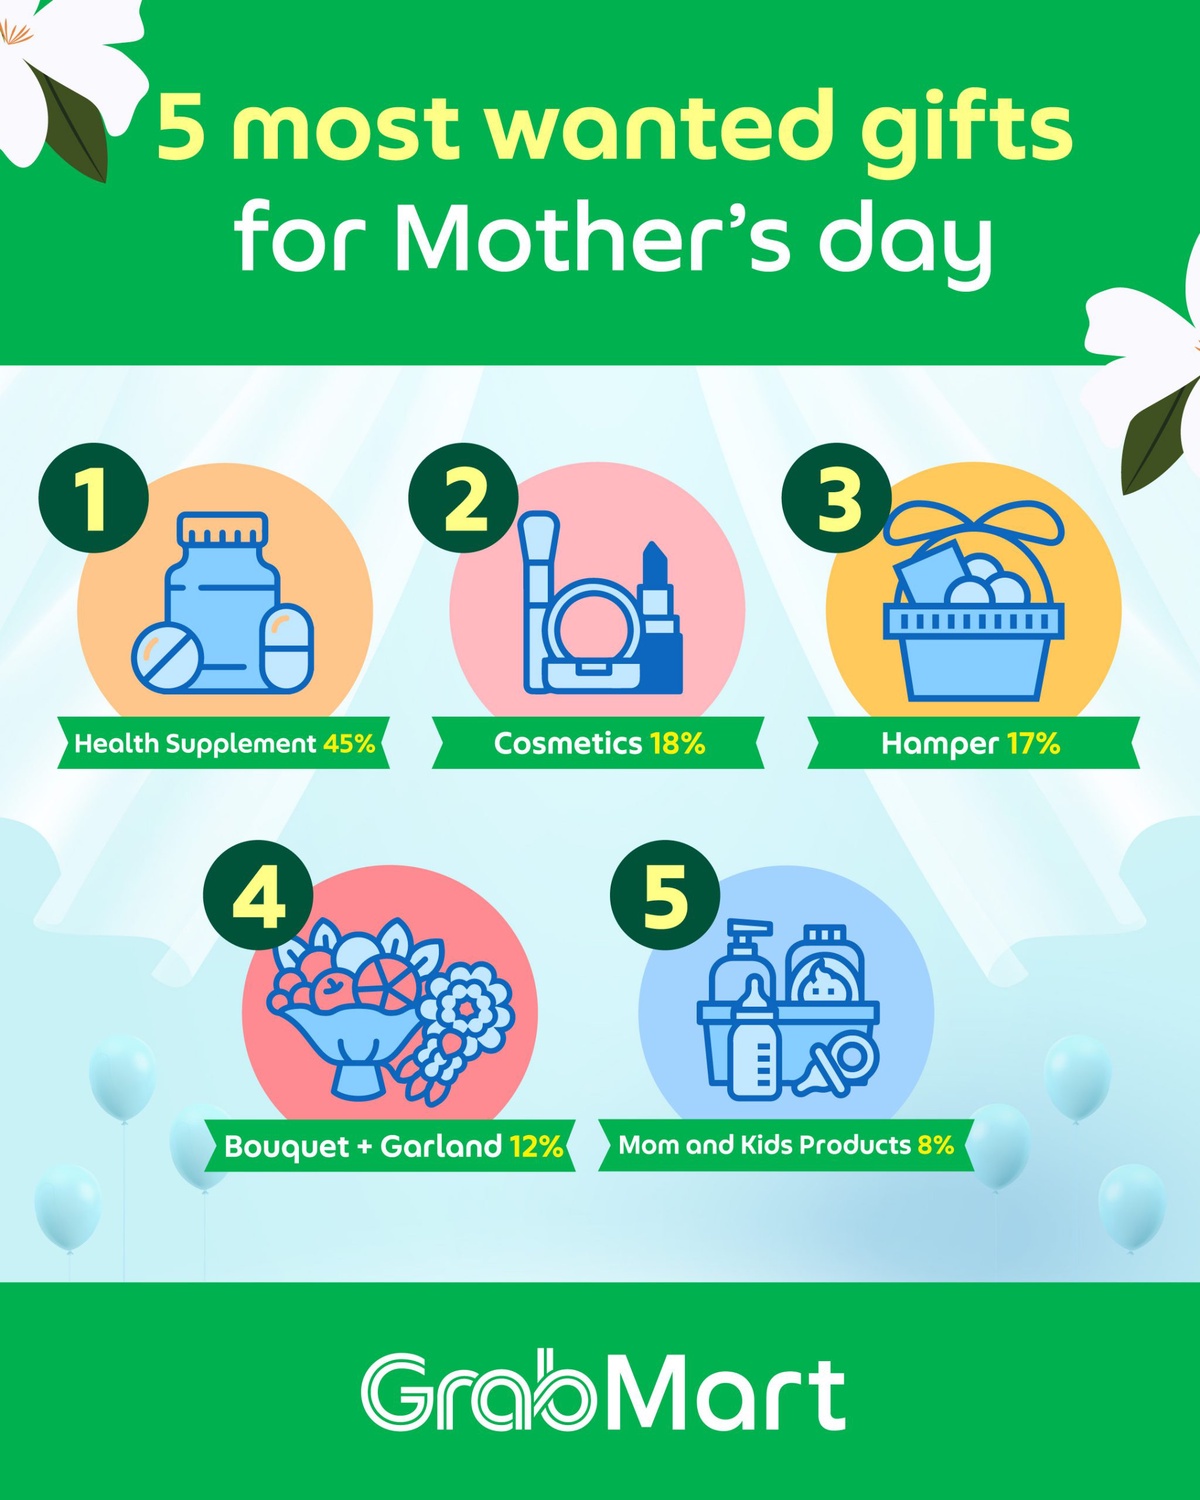 GrabMart Reveals Top Five Gifts on Moms' Wish List with Wrapped With Love for Moms with GrabMart Campaign